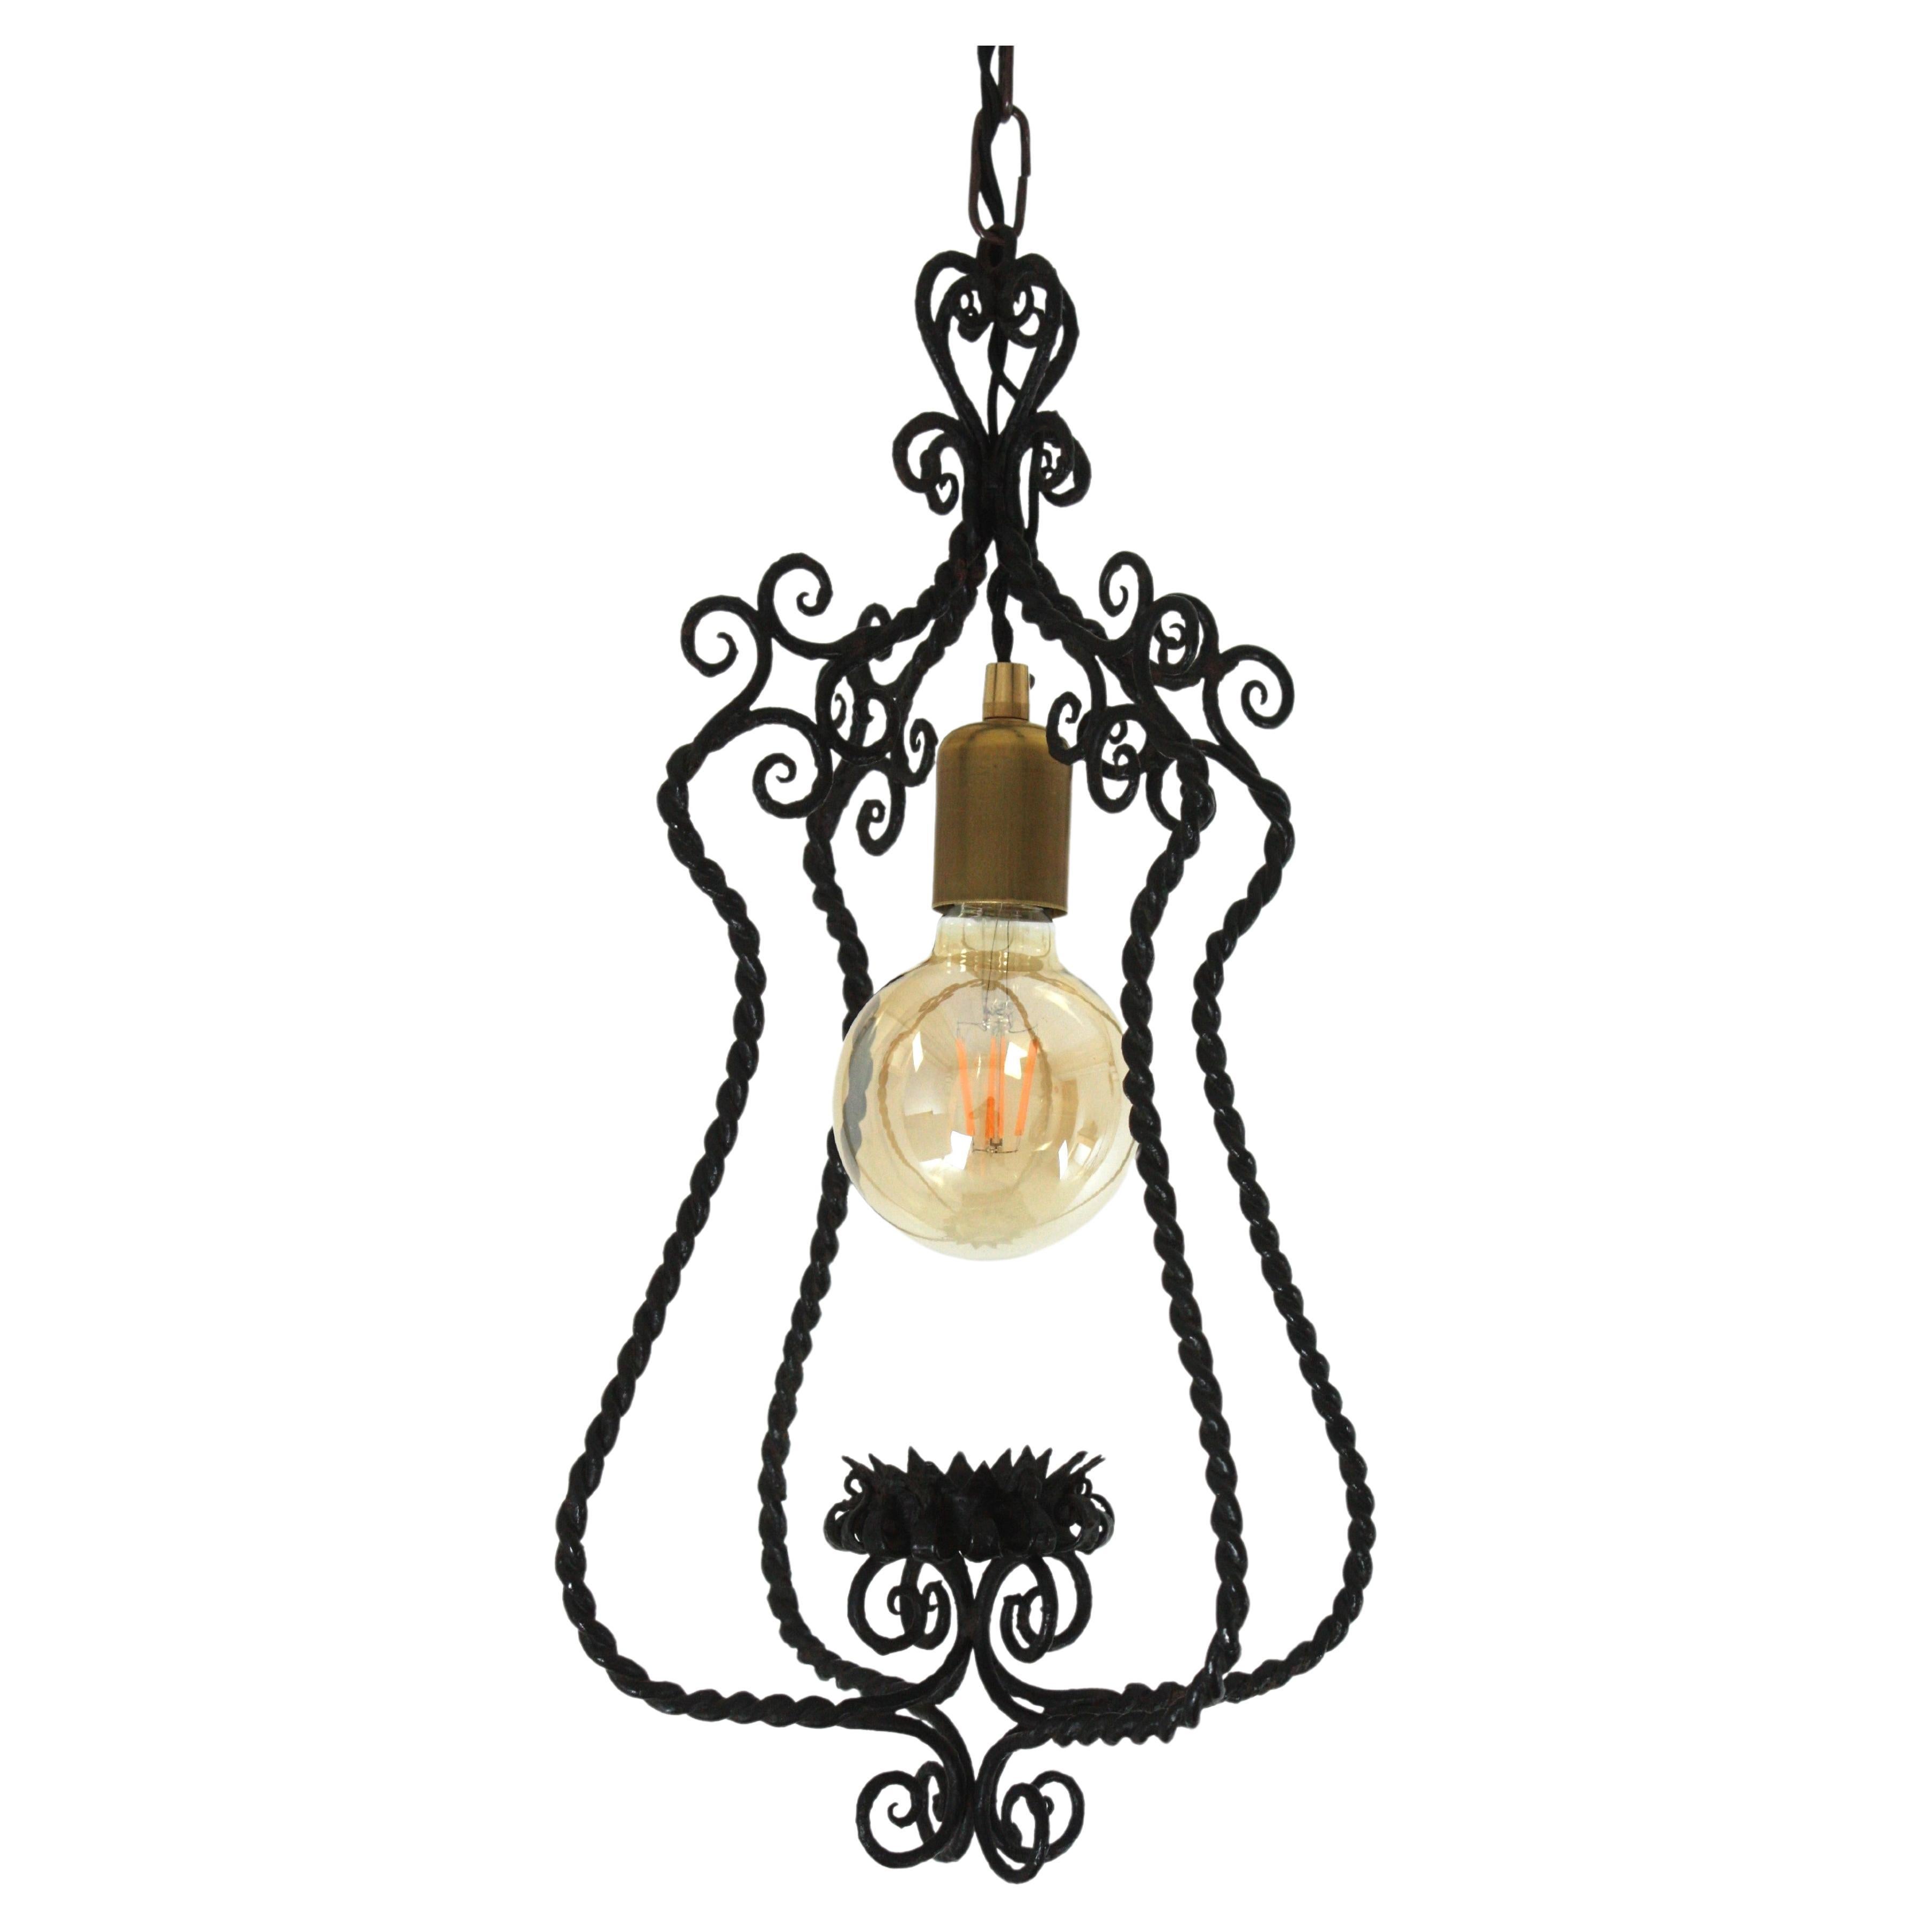 Spanish Revival Lantern Chandelier in Twisted Hand Forged Iron, 1940s
Eye-catching scrollwork lantern or hanging light with twisted iron construction.
The structure of this pendant light is made with twisting iron with scroll decoration at the top